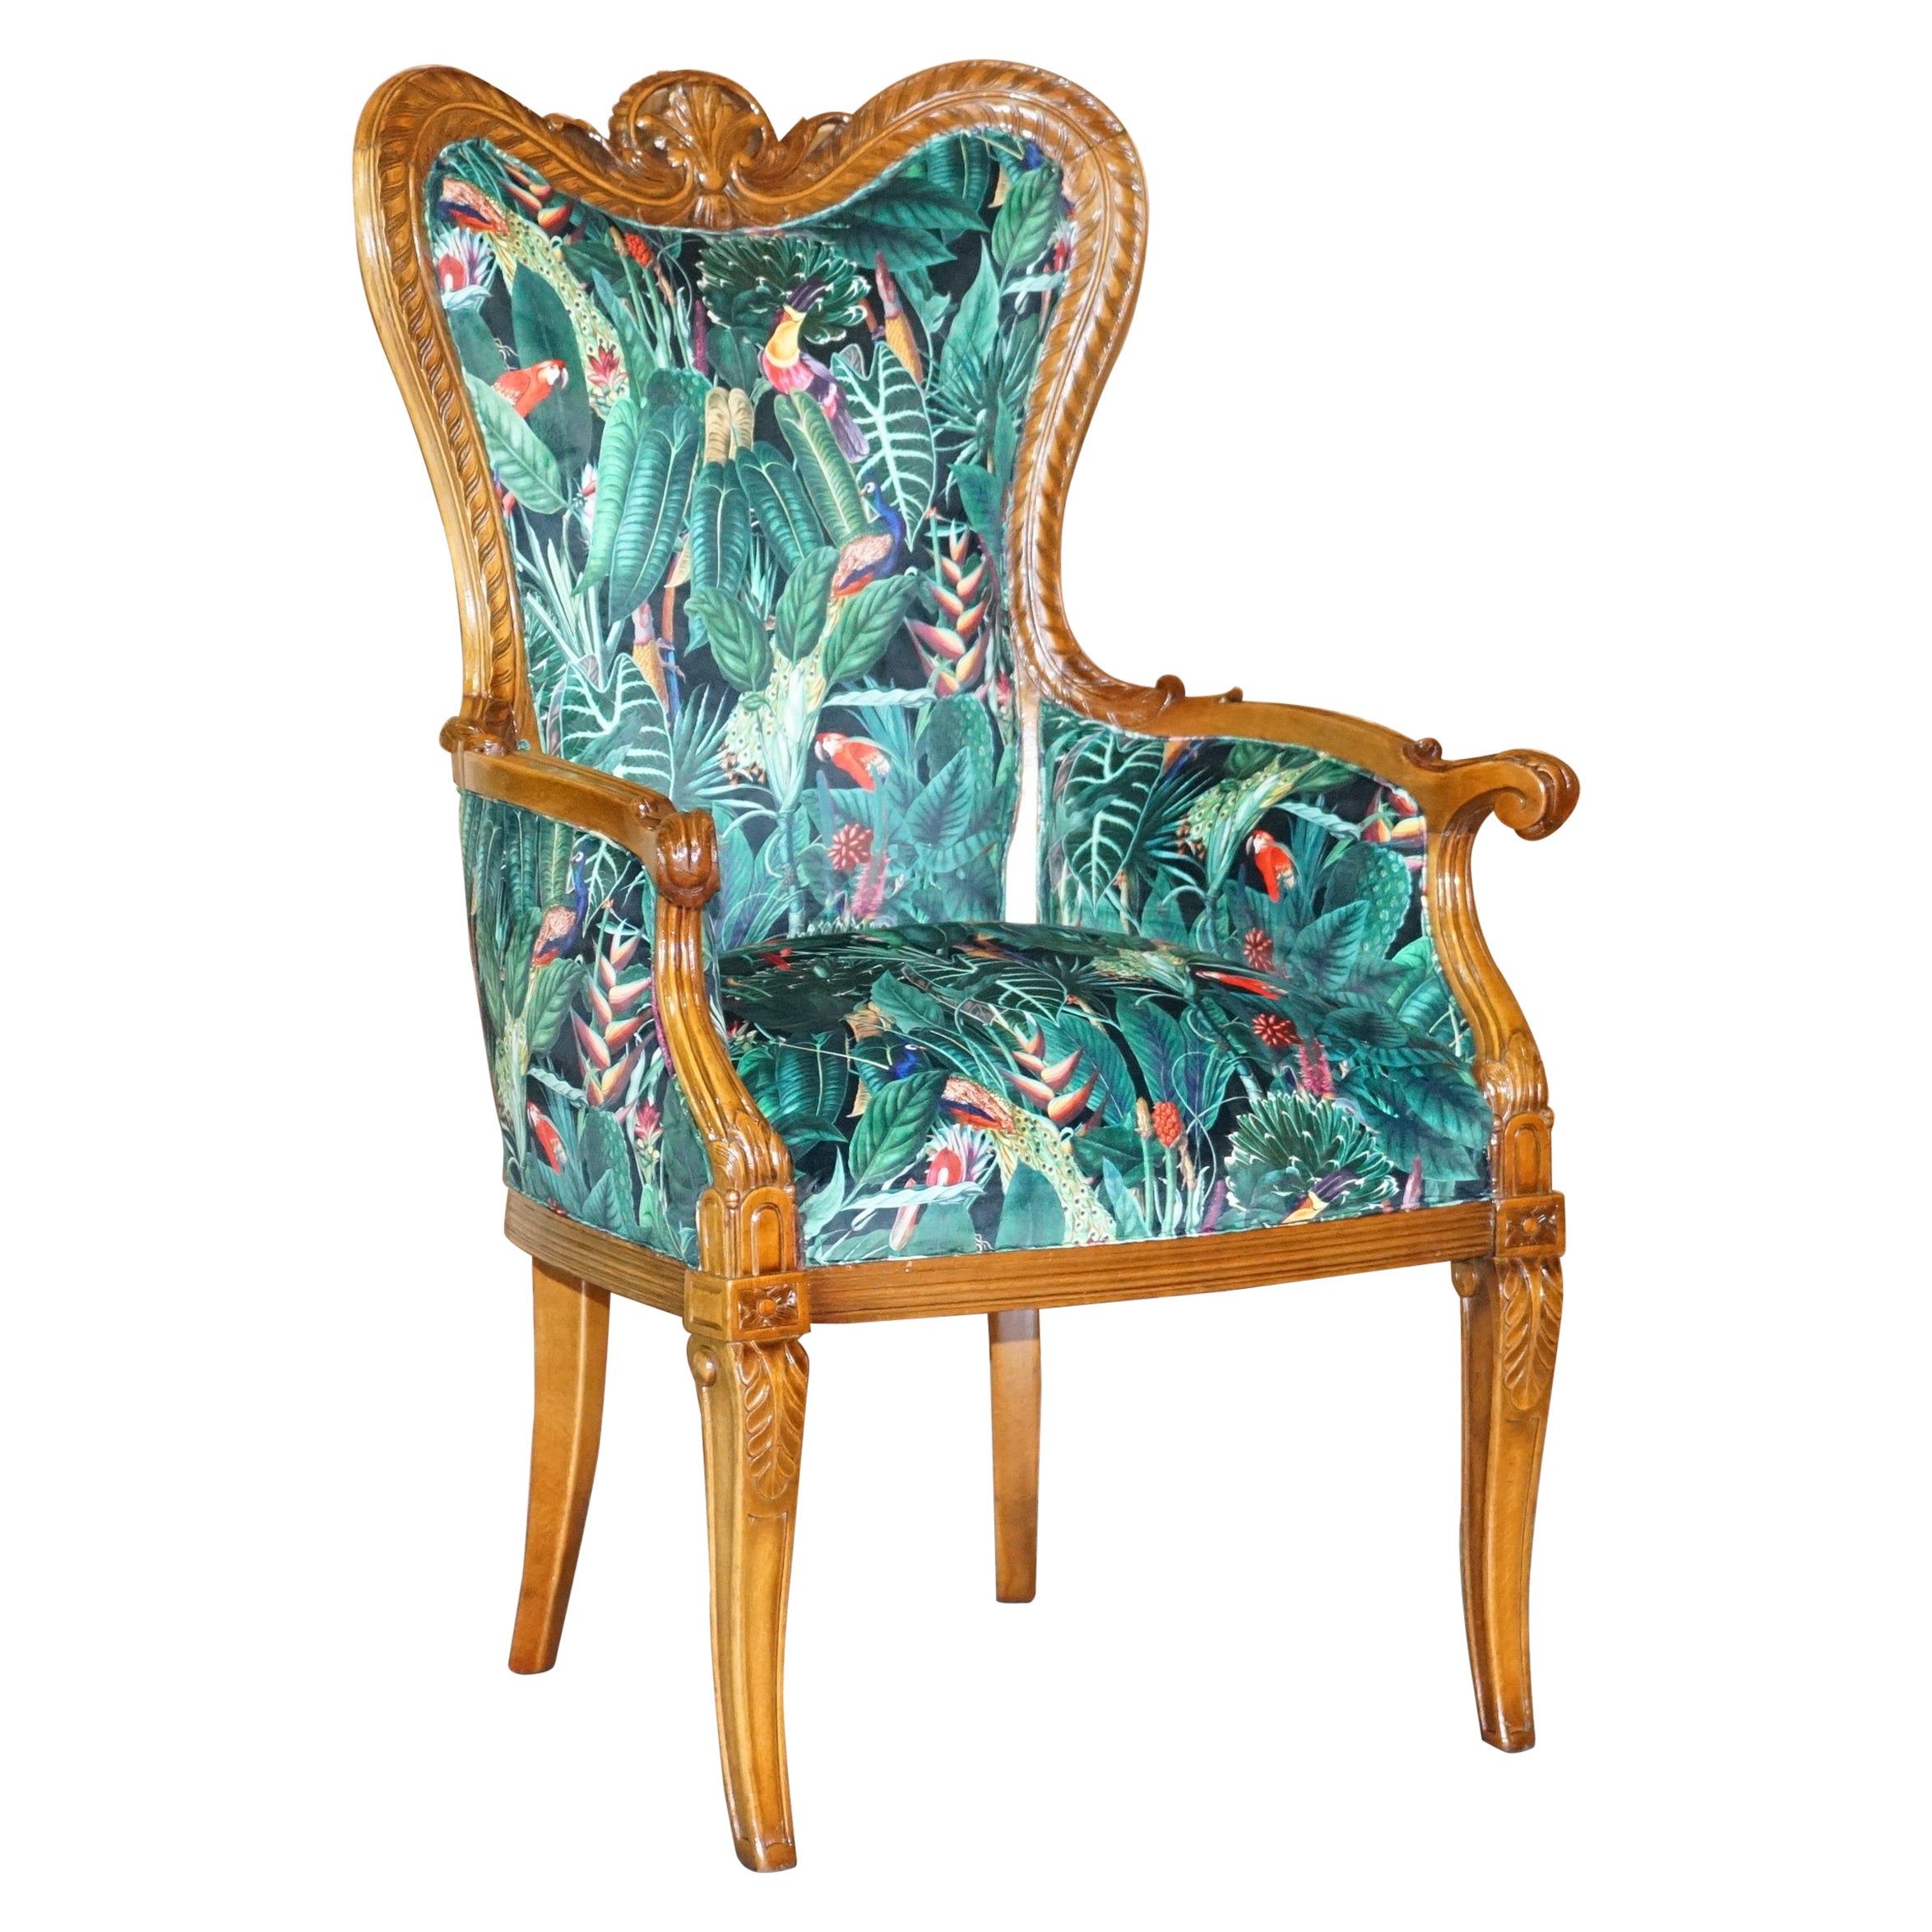 Lovely Vintage Italian Carved Walnut Armchair with Birds of Paradise Upholstery For Sale